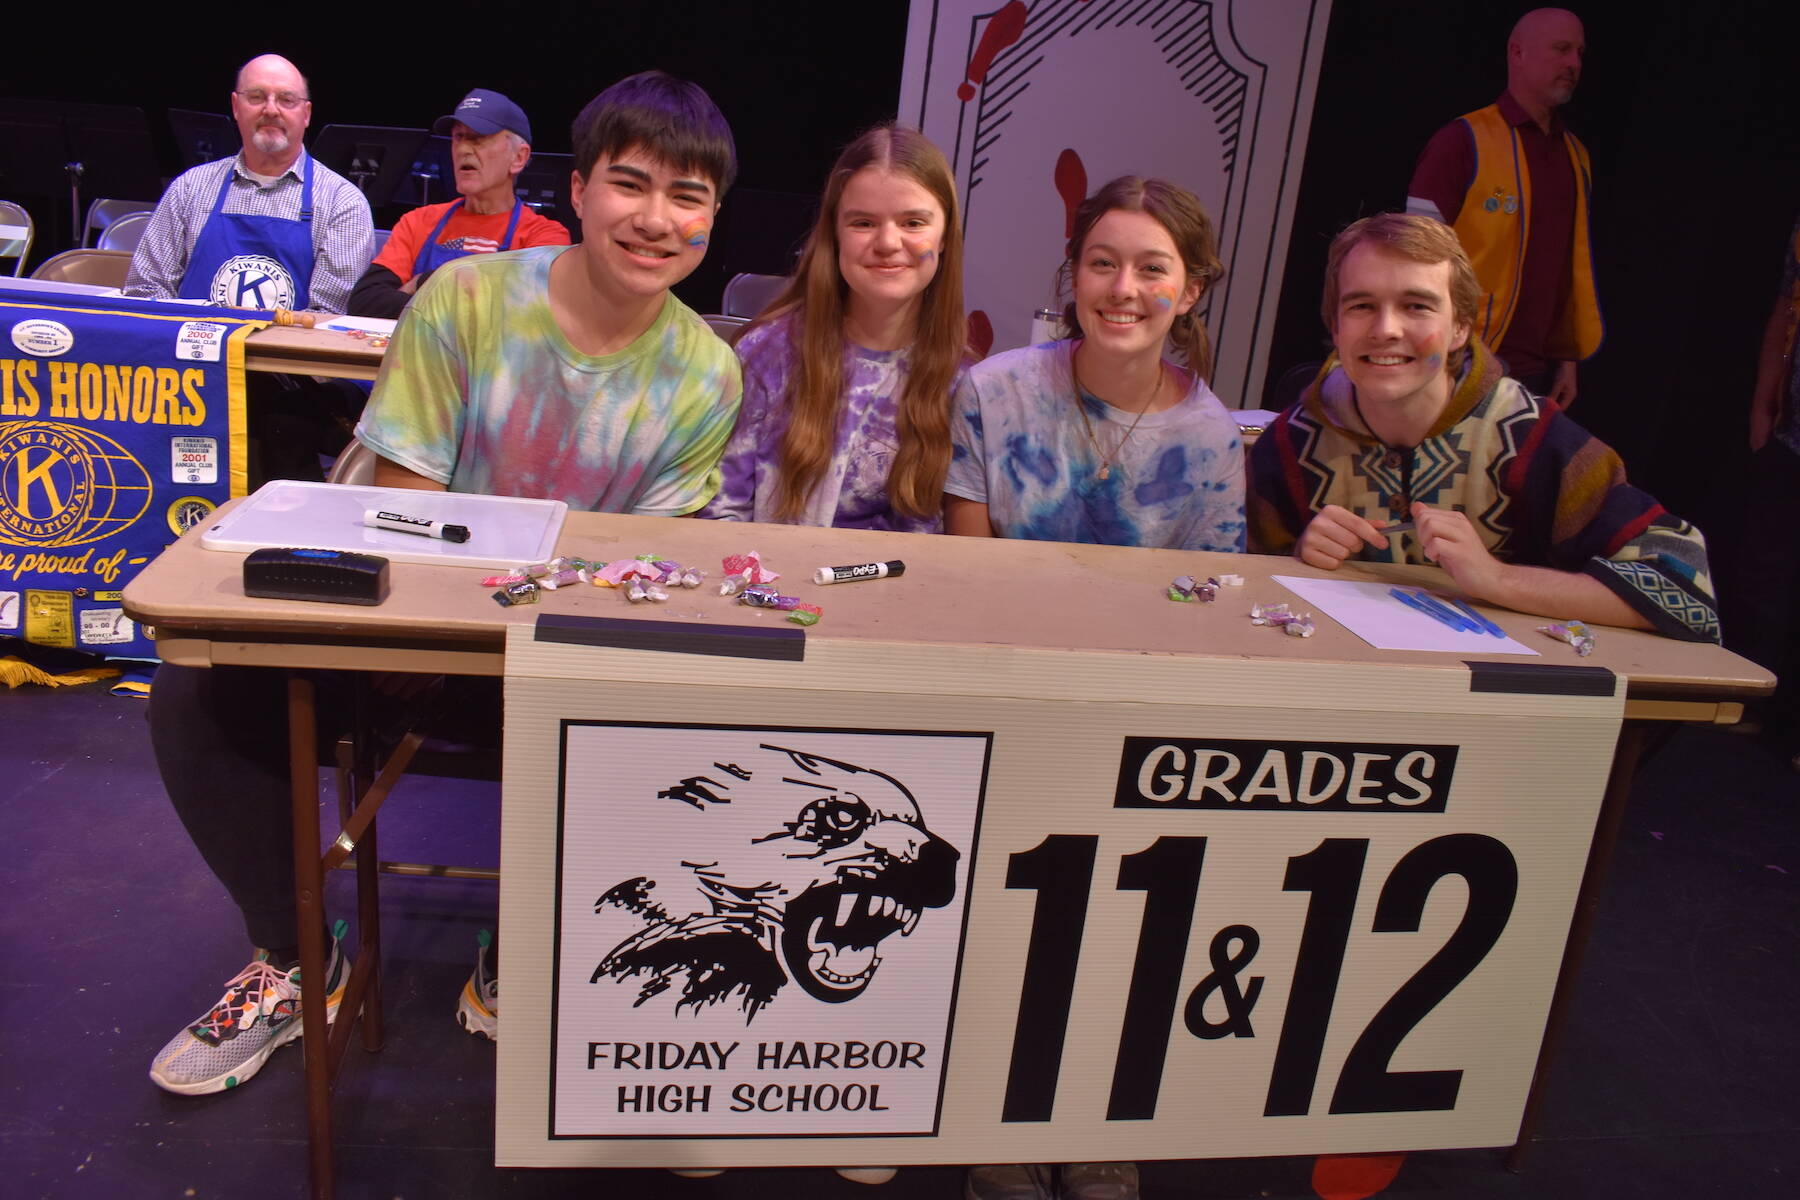 Kelley Balcomb-Bartok \ Staff photo
The FHHS Juniors and Seniors team members competing in the San Juan Public Schools Foundation’s 28th annual Knowledge Bowl include (l-r) Bryce Ridwan, Ava Martin, Islay Ross, and Colby Border.